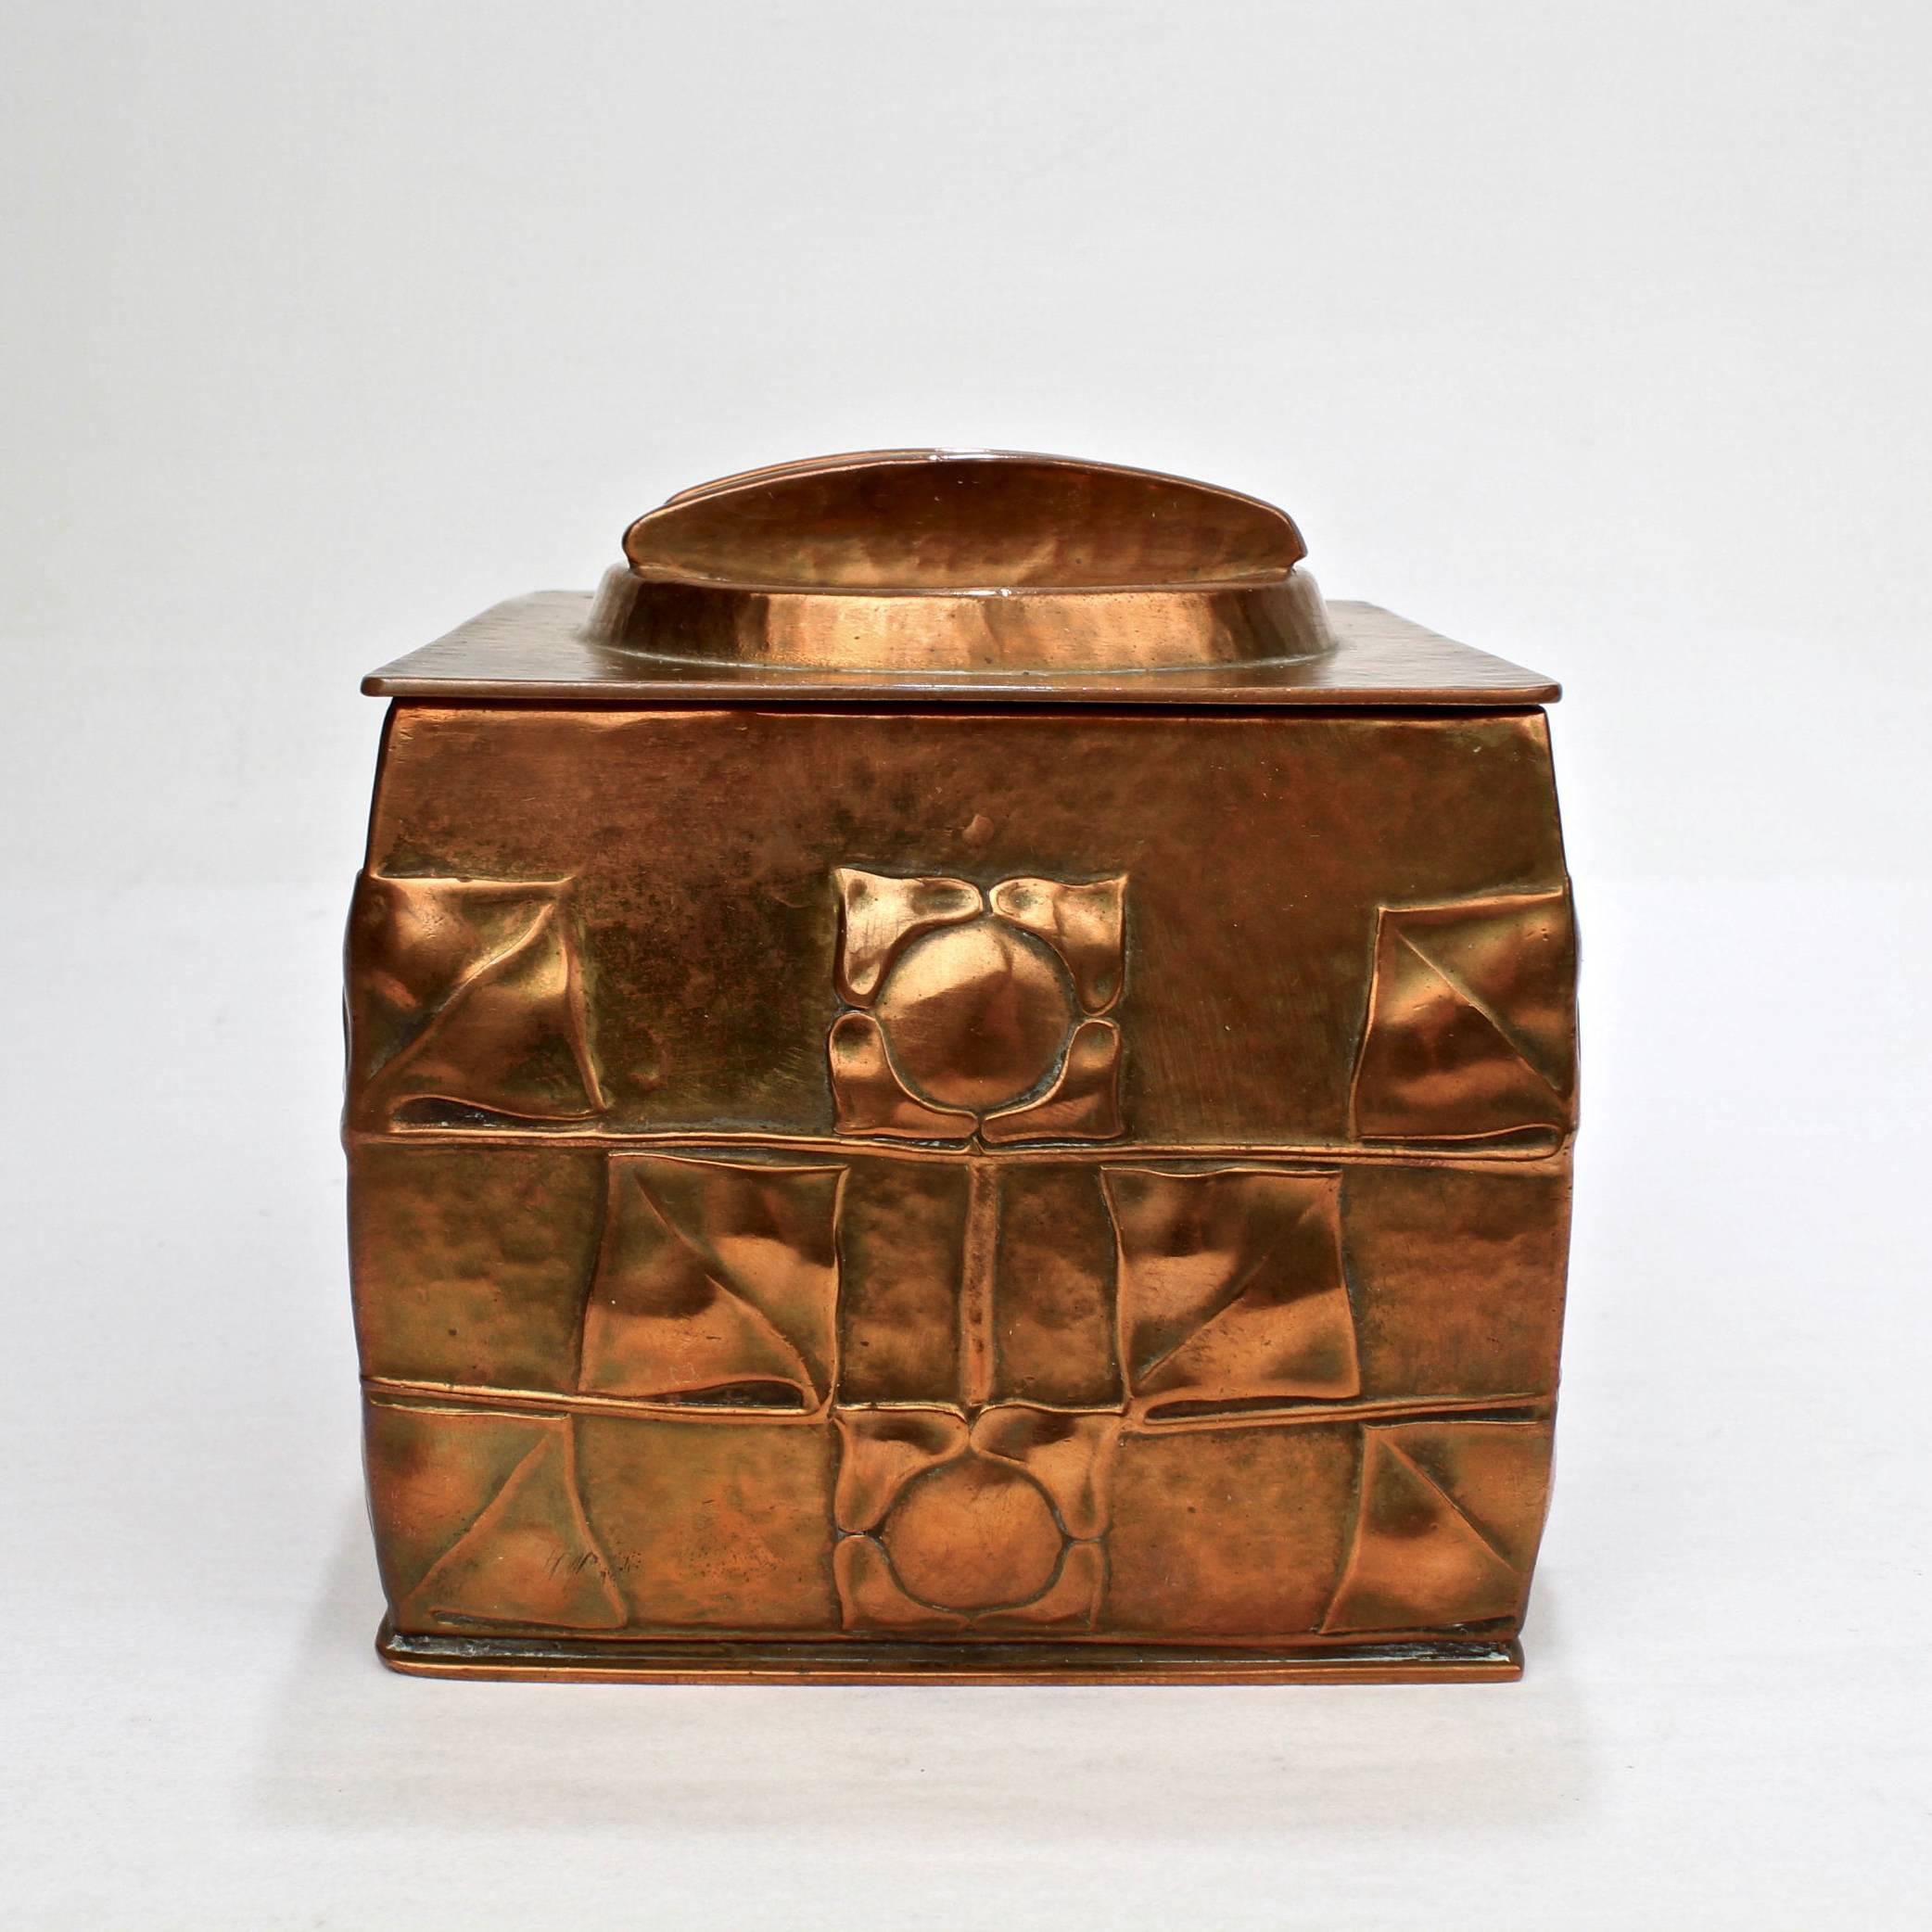 American Art Nouveau Archibald Knox Design Copper Humidor by Jenning Brothers